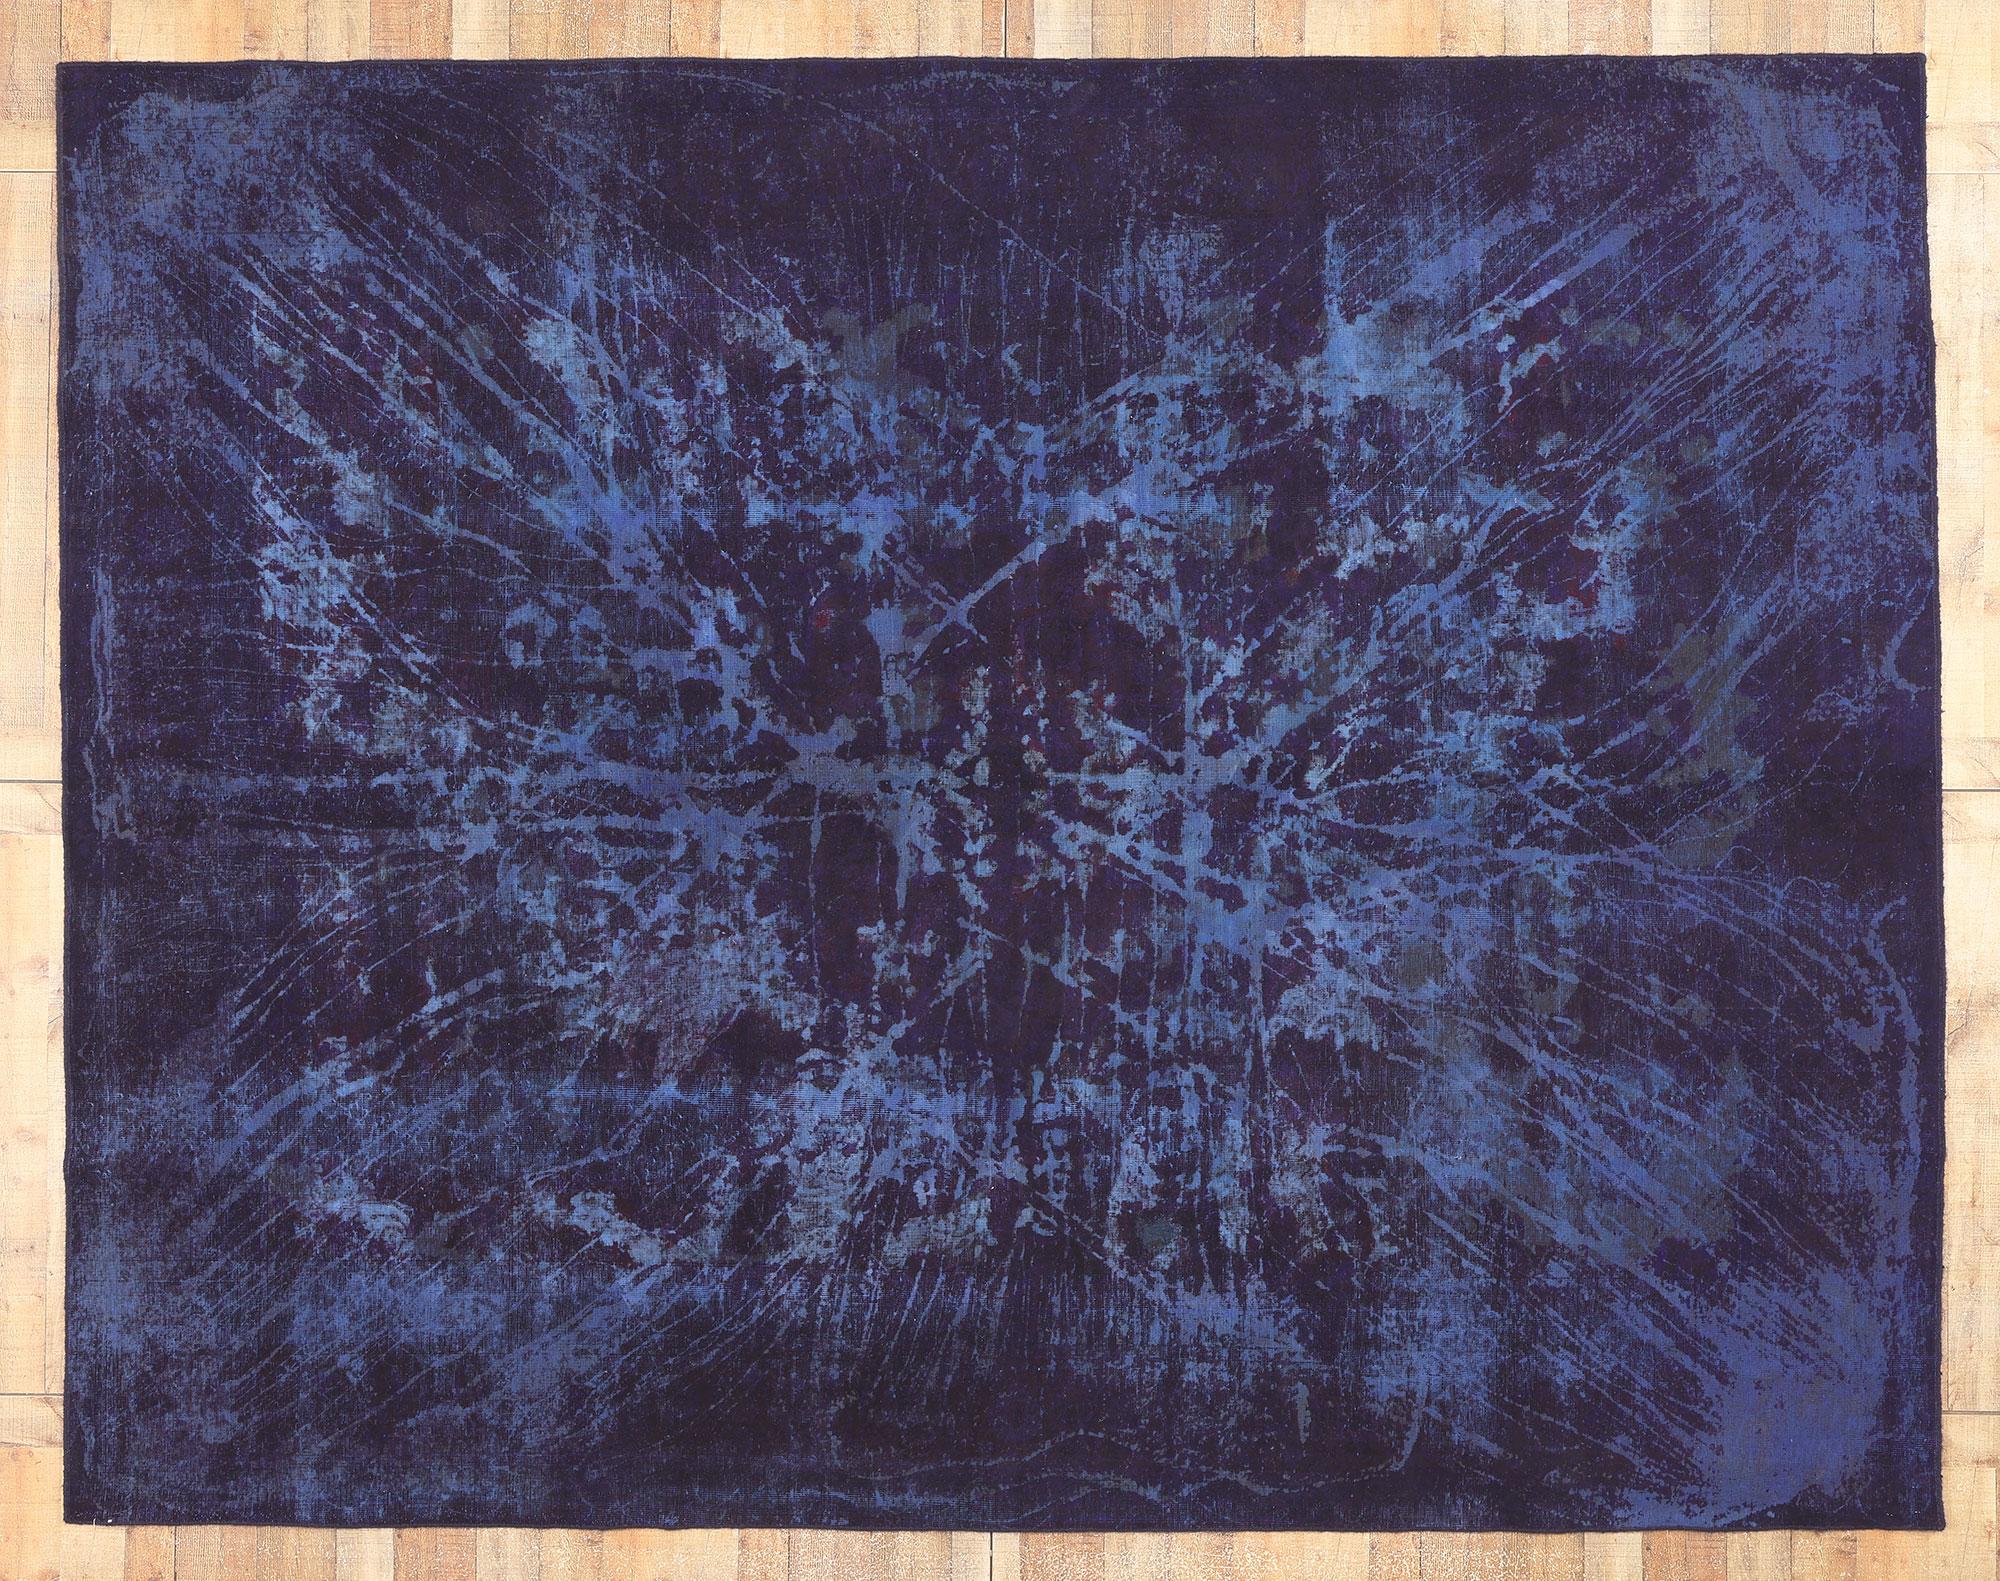  Vintage Turkish Overdyed Rug, Enigmatic Sophistication Meets Abstract Art For Sale 3